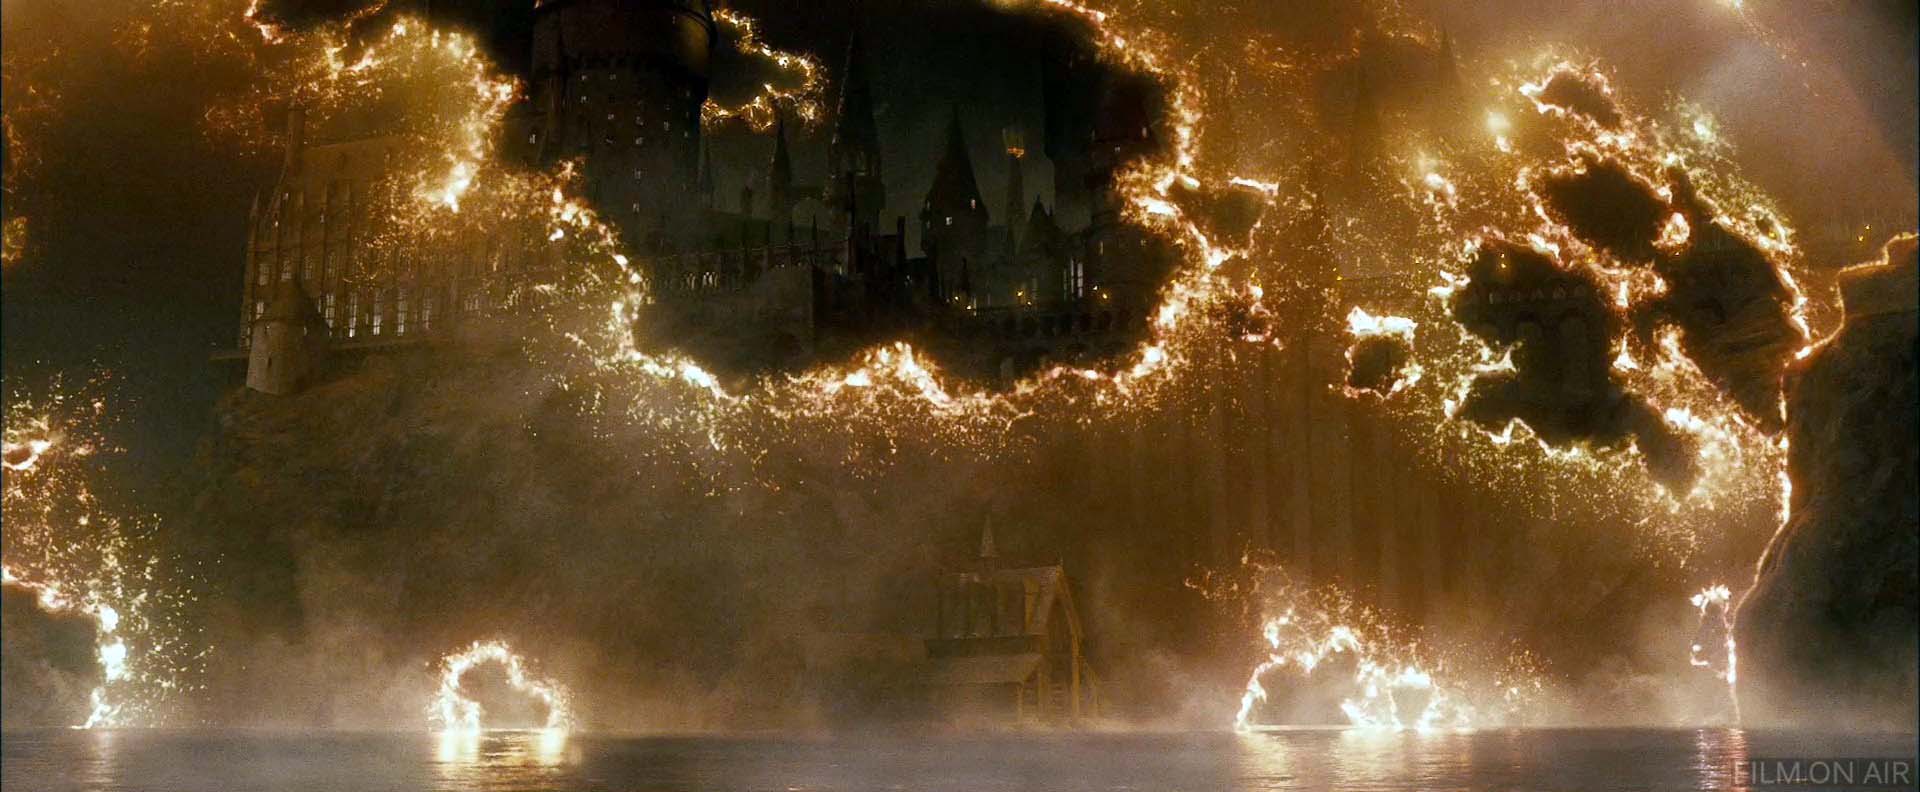 Burning Sky
 in Harry Potter and the Deathly Hallows Part 2 in Harry Potter and the Deathly Hallows Part 2